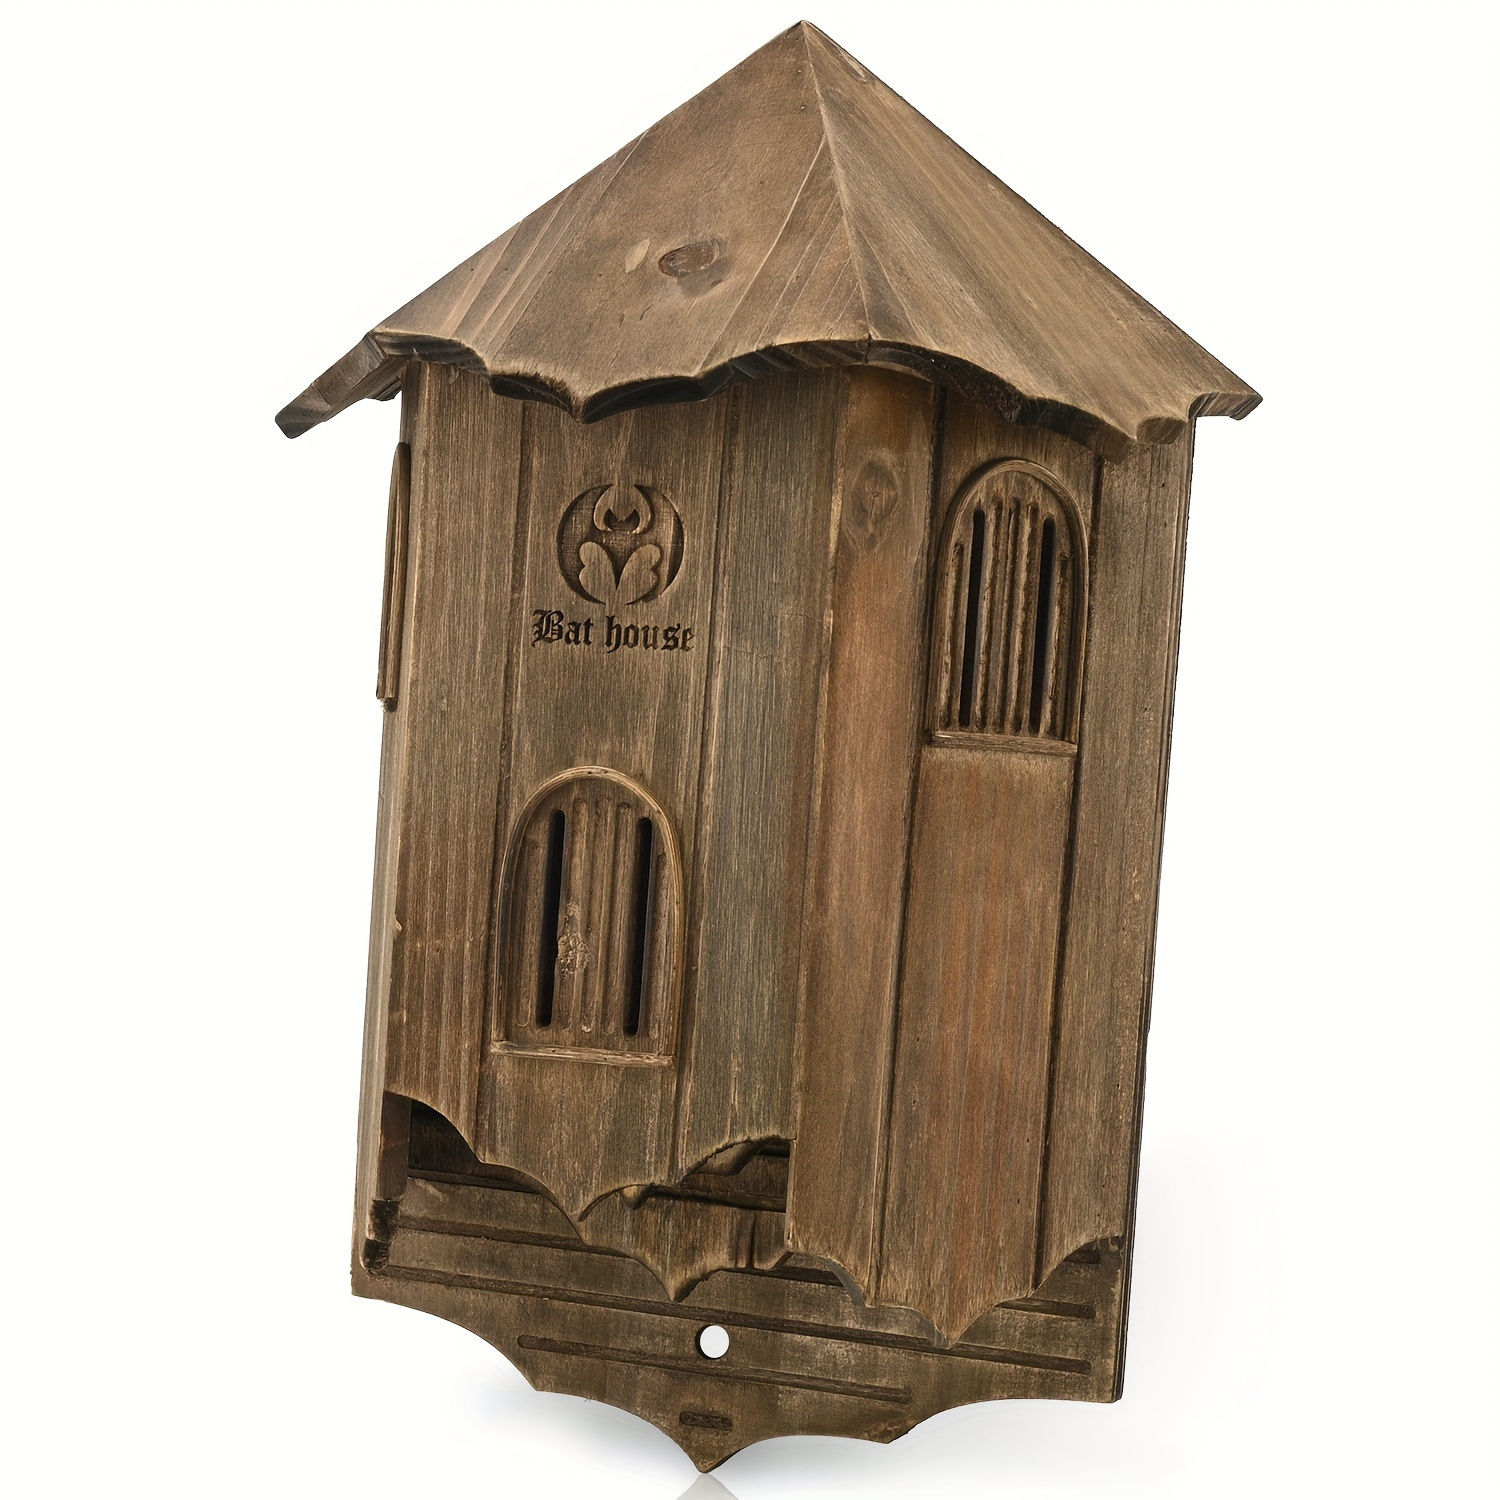 

Wooden Castle Bat Houses For Outside Bat Box For Outdoors - Large 3 Chamber Box Perfectly Designed To Attract Bats - Durable And Easy To Hang